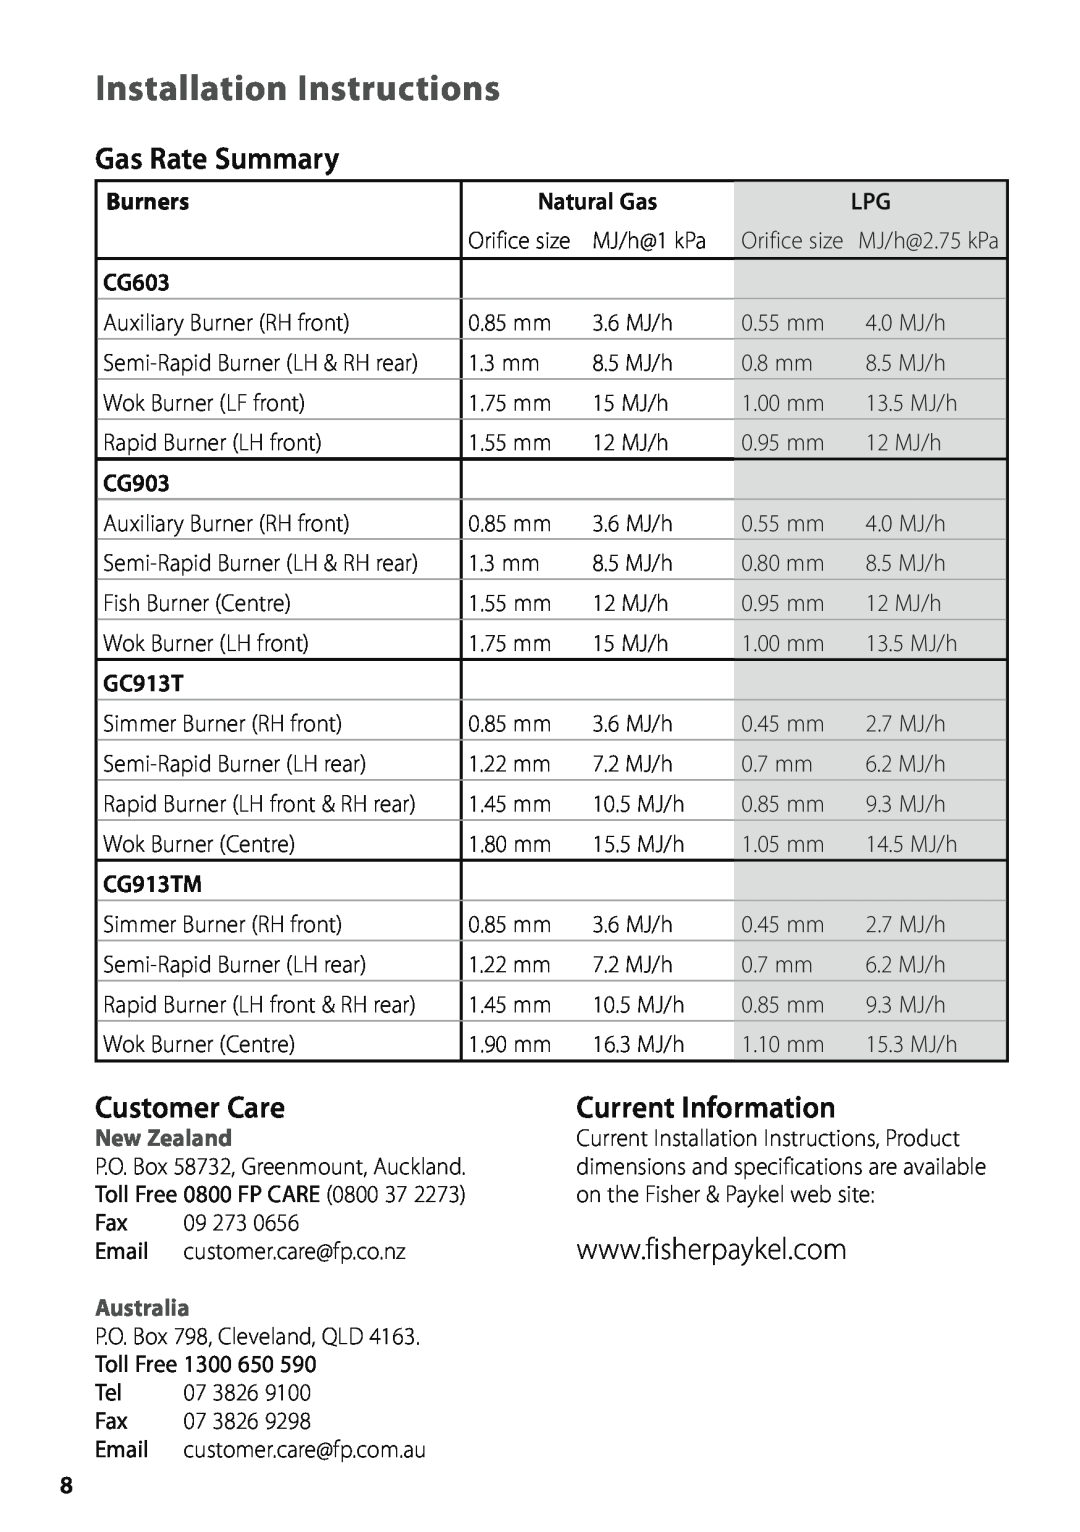 Fisher & Paykel Gas Rate Summary, Customer Care, Current Information, Burners CG603, Natural Gas, CG903, GC913T 